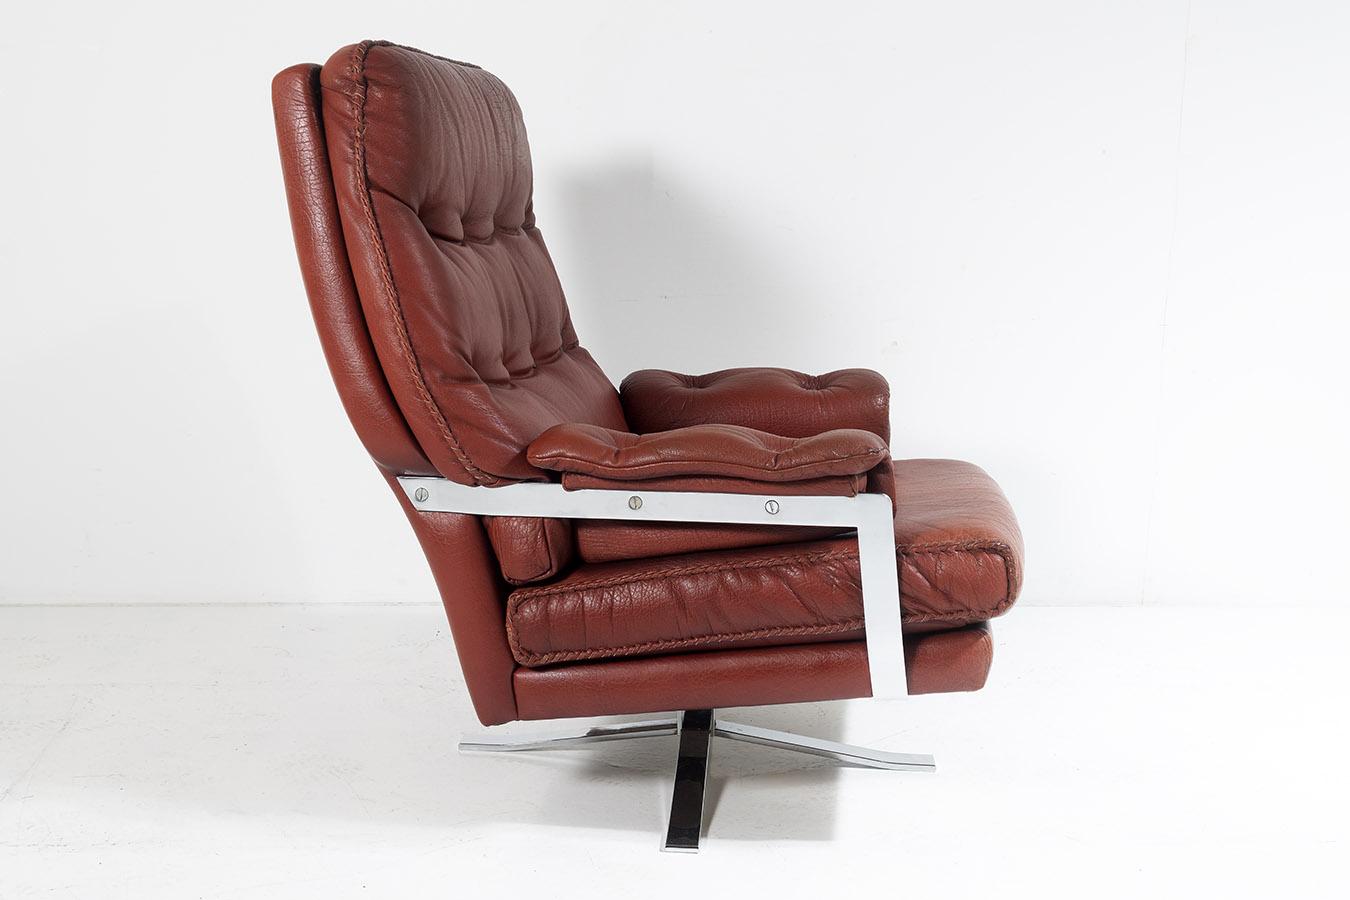 1960s Mid Centry Burnt Orange Brown Leather Swivel Chair in style of Arne Norell In Good Condition For Sale In Llanbrynmair, GB